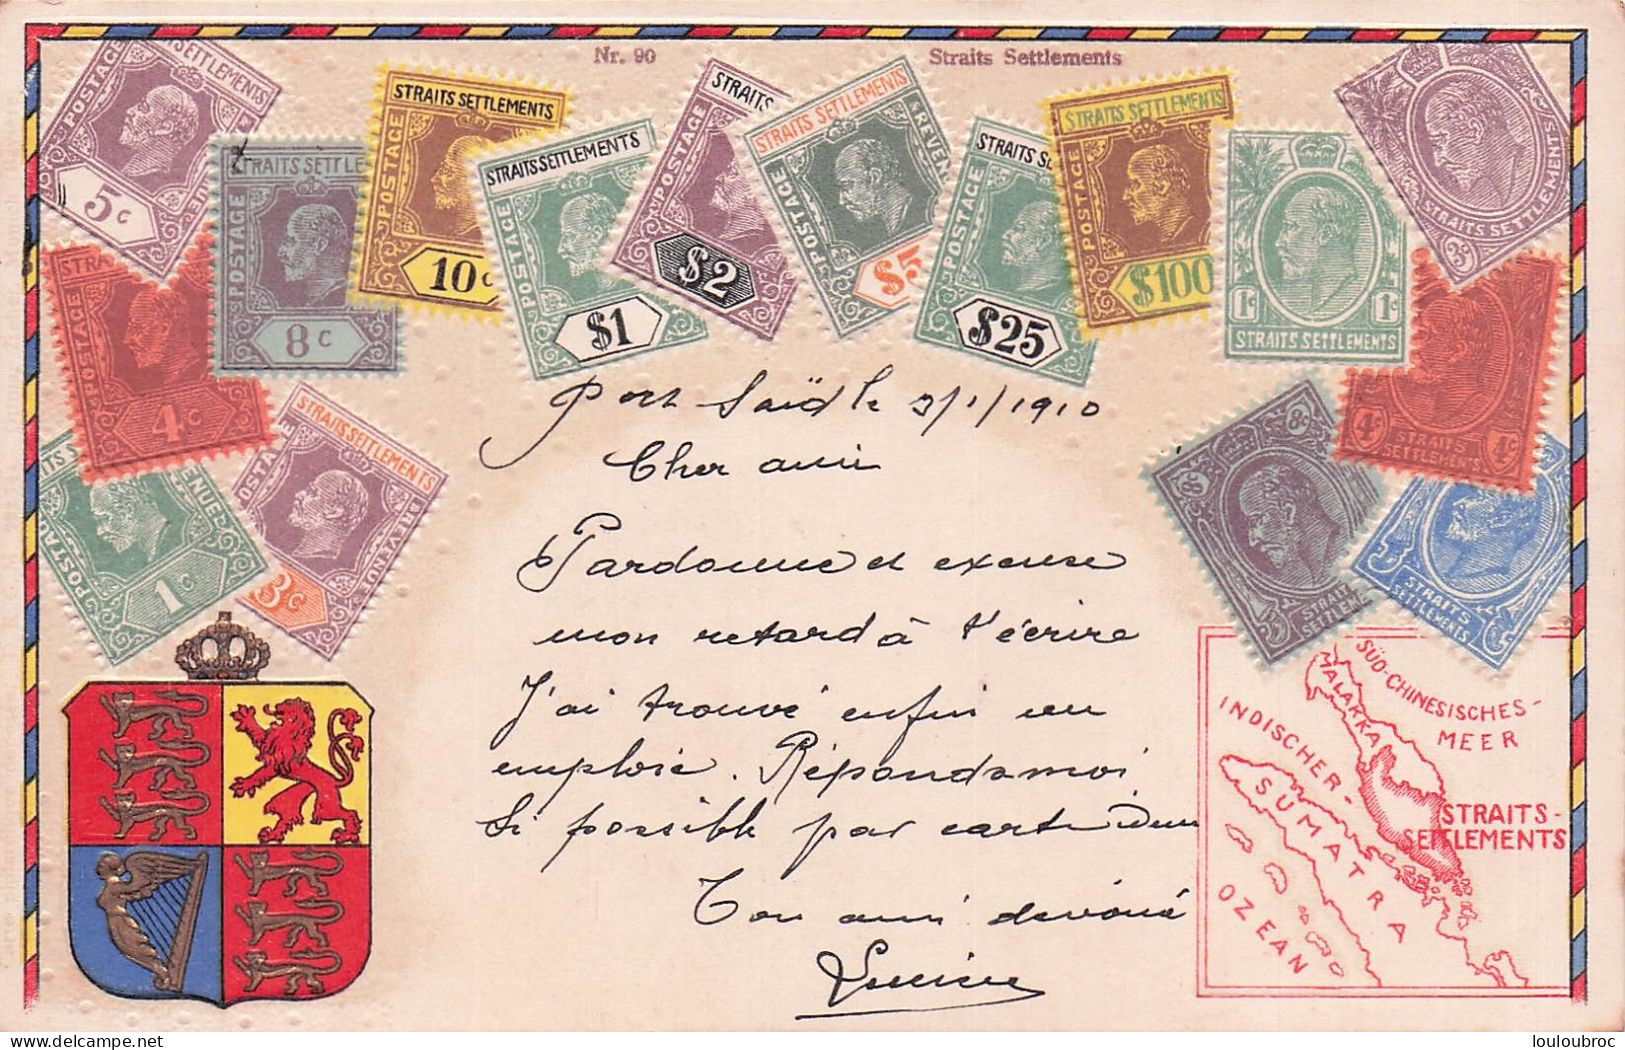 STRAITS SETTLEMENTS - Stamps (pictures)